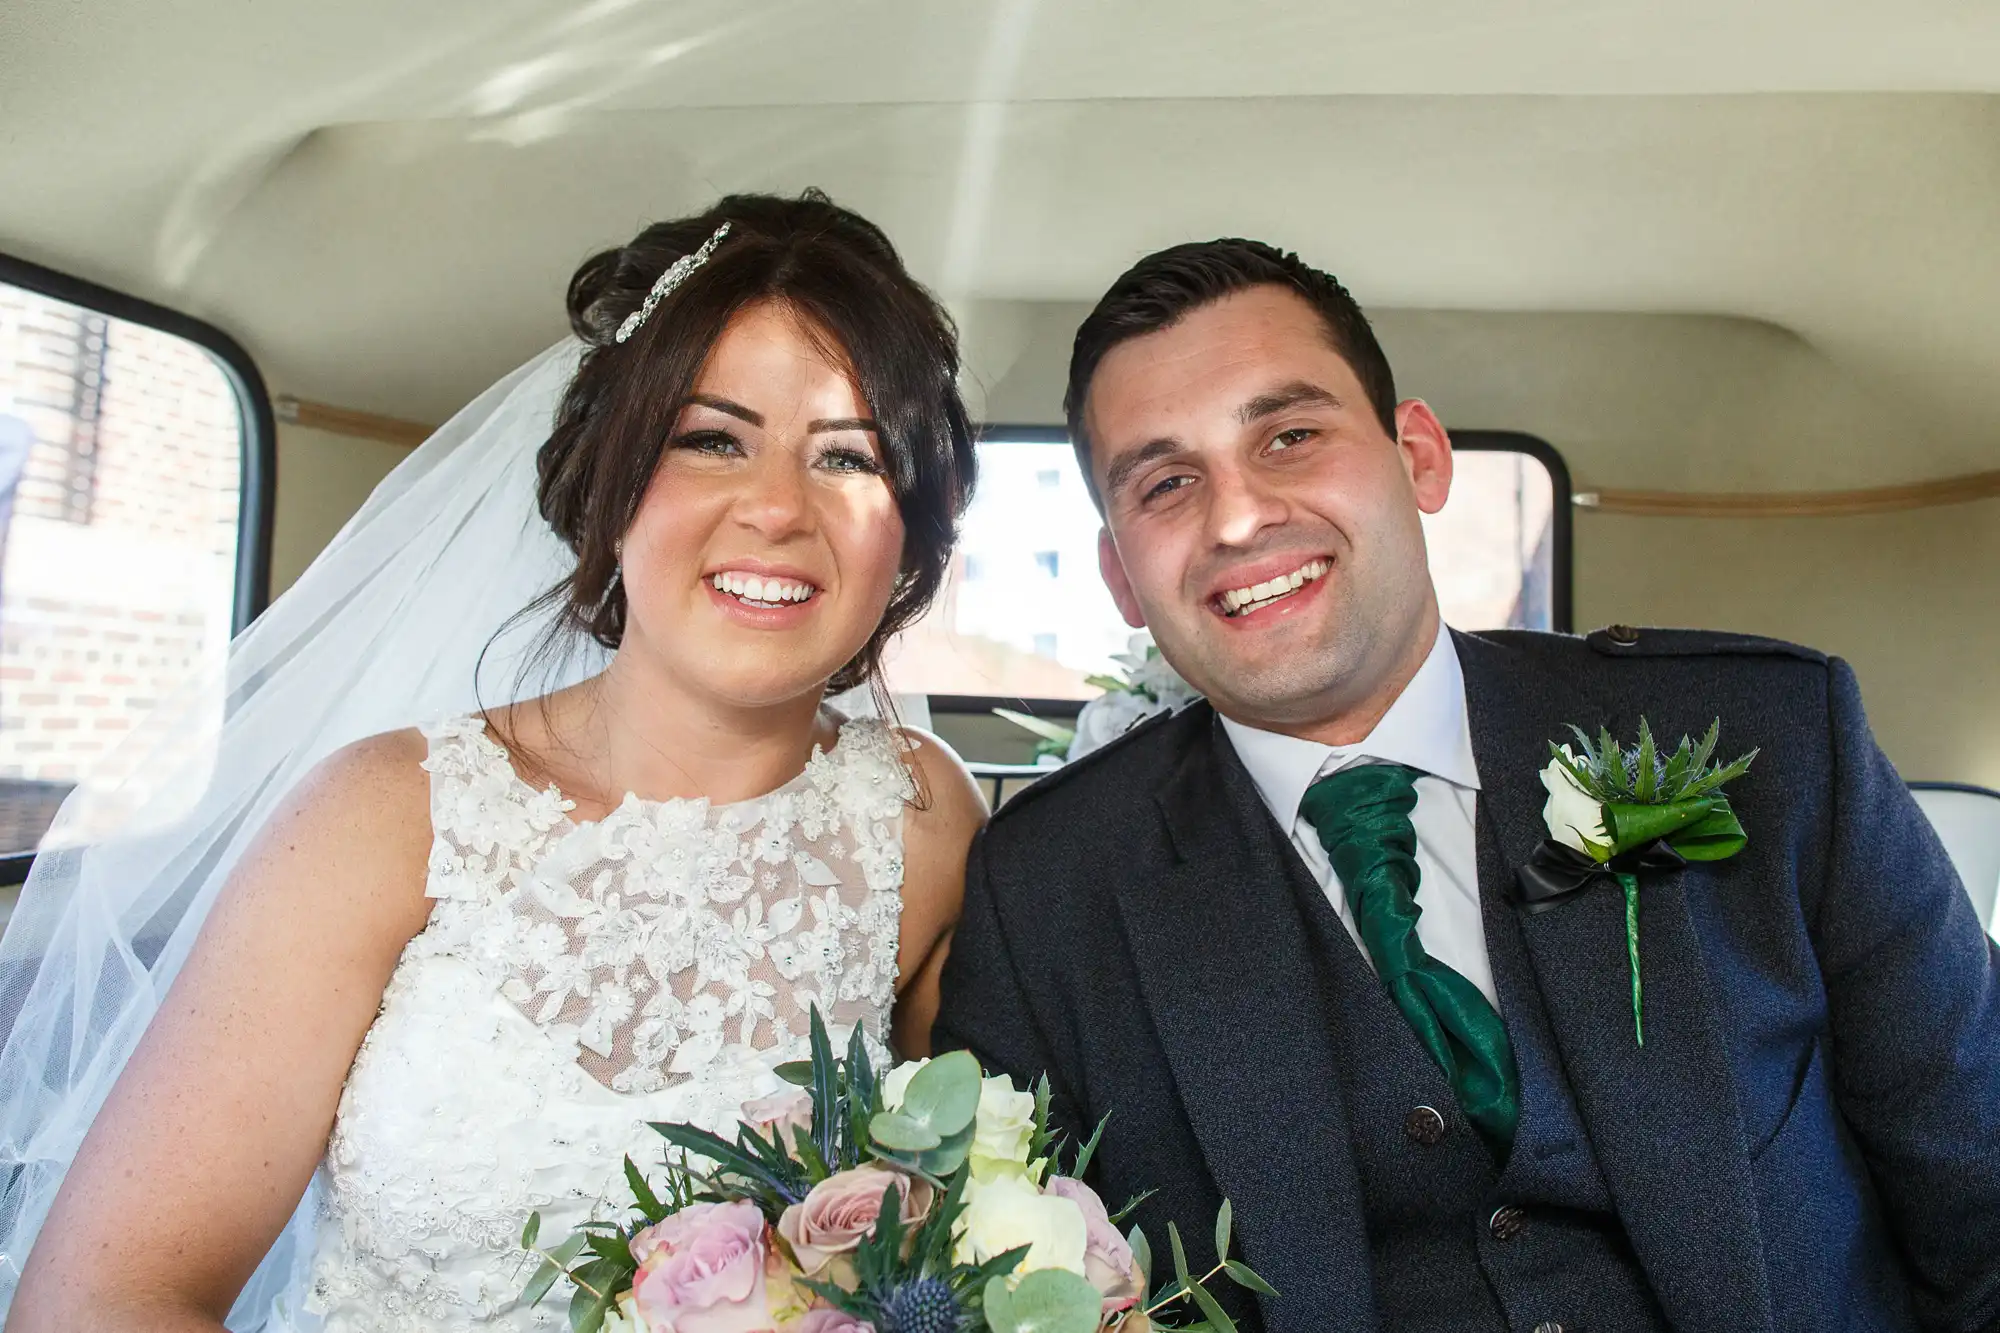 A newlywed couple smiling inside a car, the bride in a lace dress holding a bouquet, and the groom in a green tie and suit with a floral boutonniere.